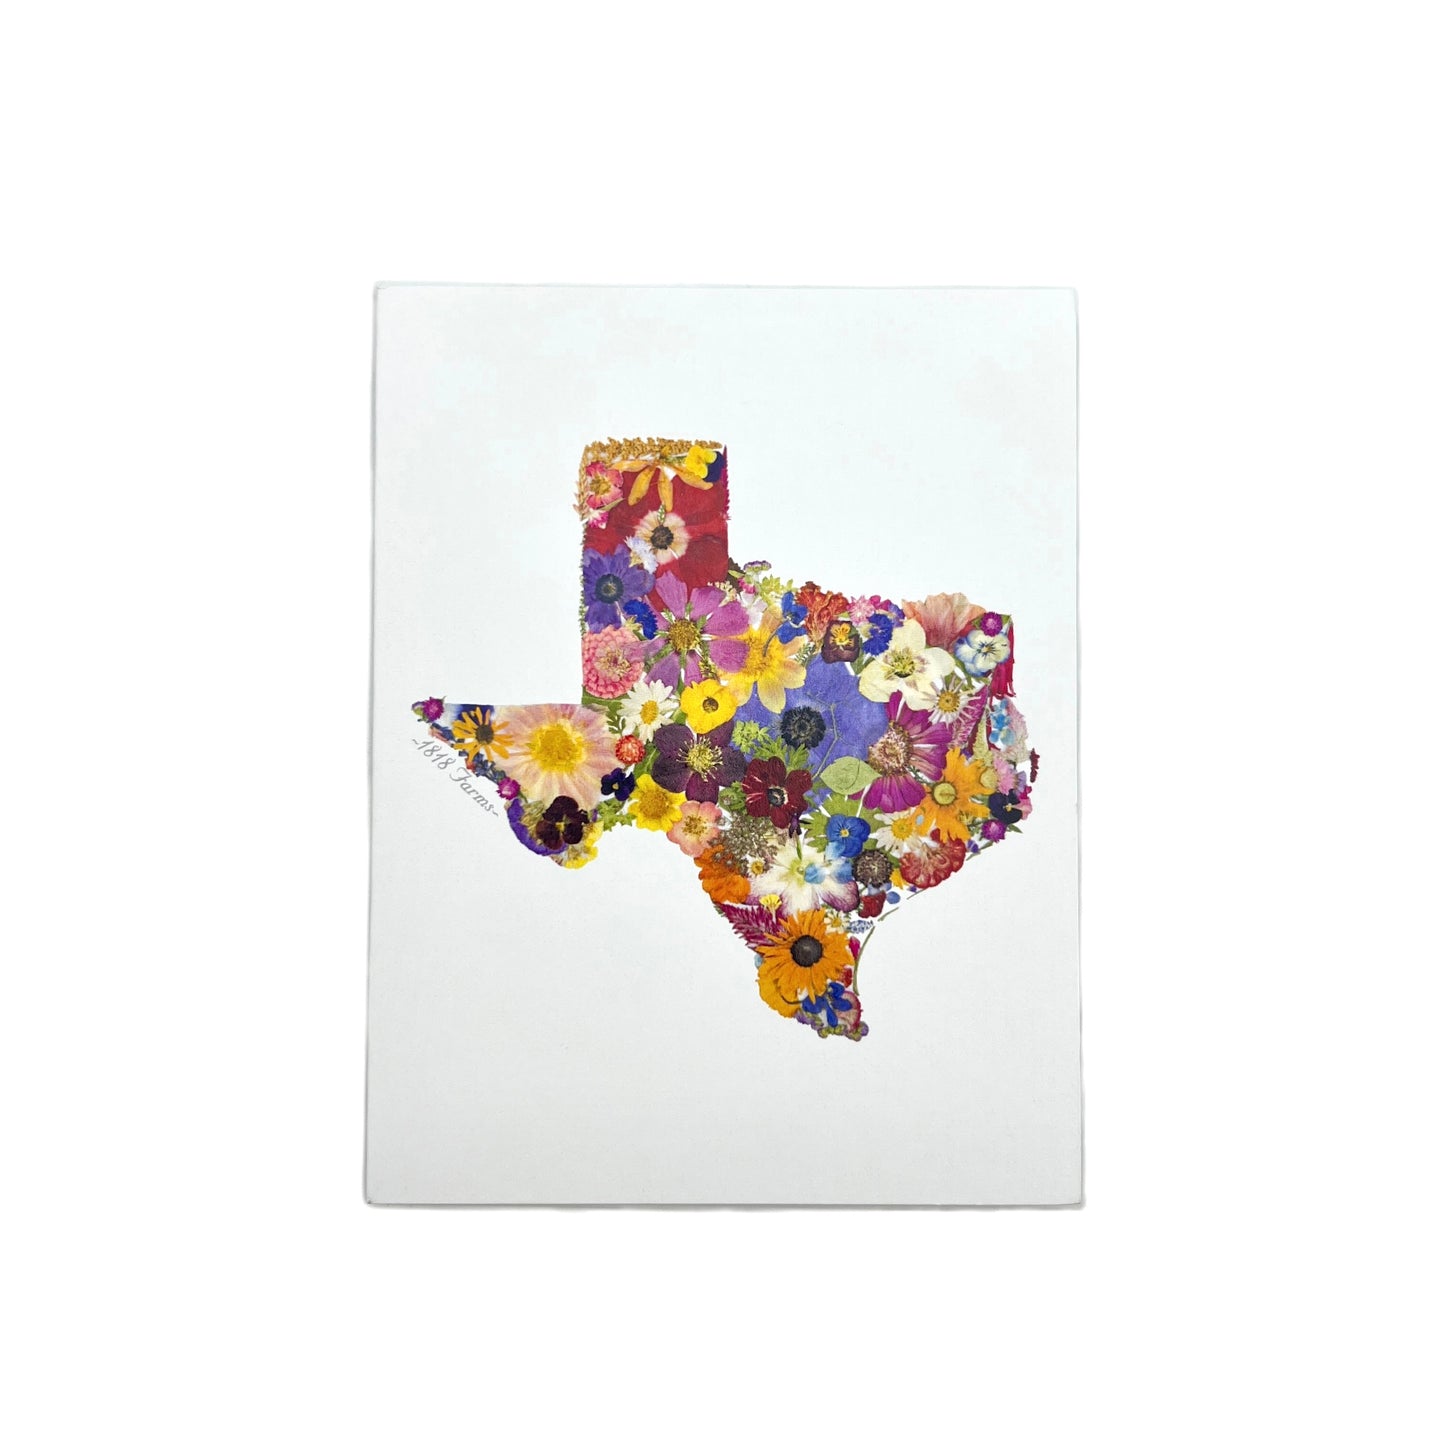 State Themed Notecards (Set of 6)  - "Where I Bloom" Collection Notecard 1818 Farms Texas  